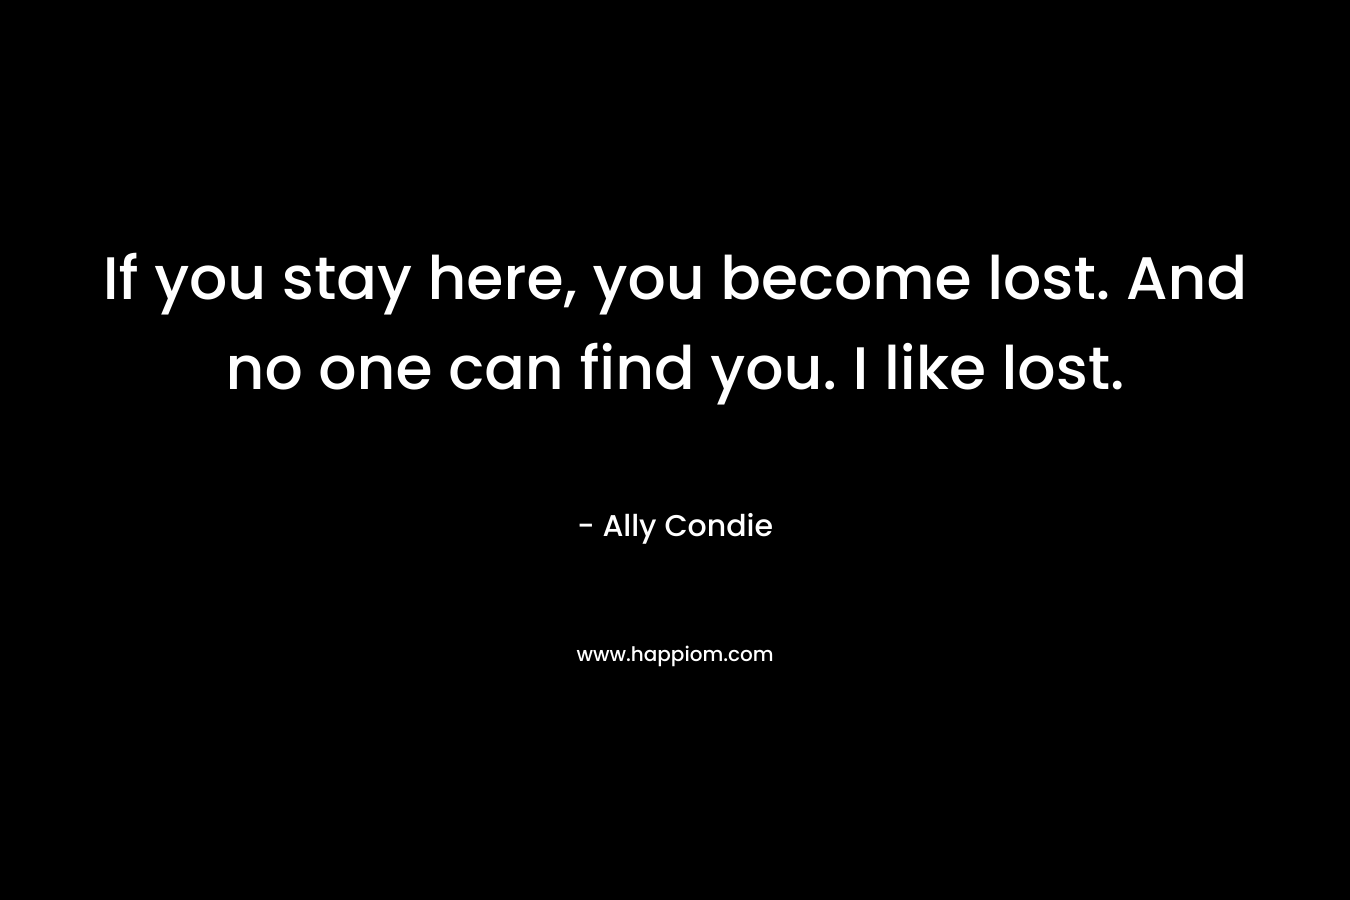 If you stay here, you become lost. And no one can find you. I like lost.